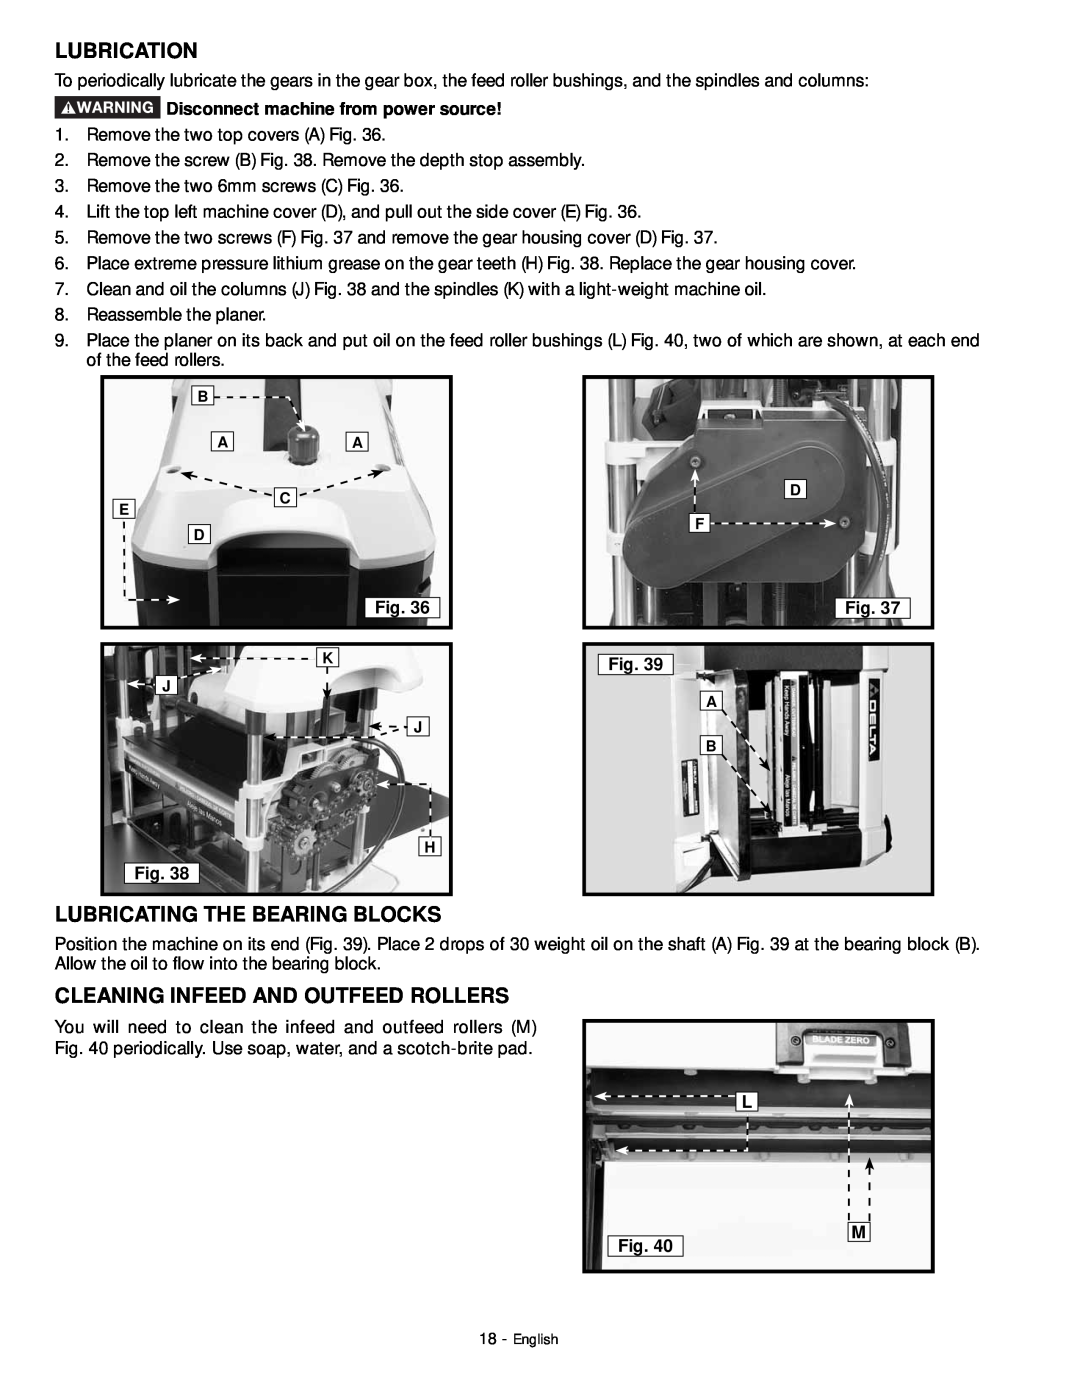 DeWalt 18657 instruction manual Lubrication, Lubricating The Bearing Blocks, Cleaning Infeed And Outfeed Rollers 